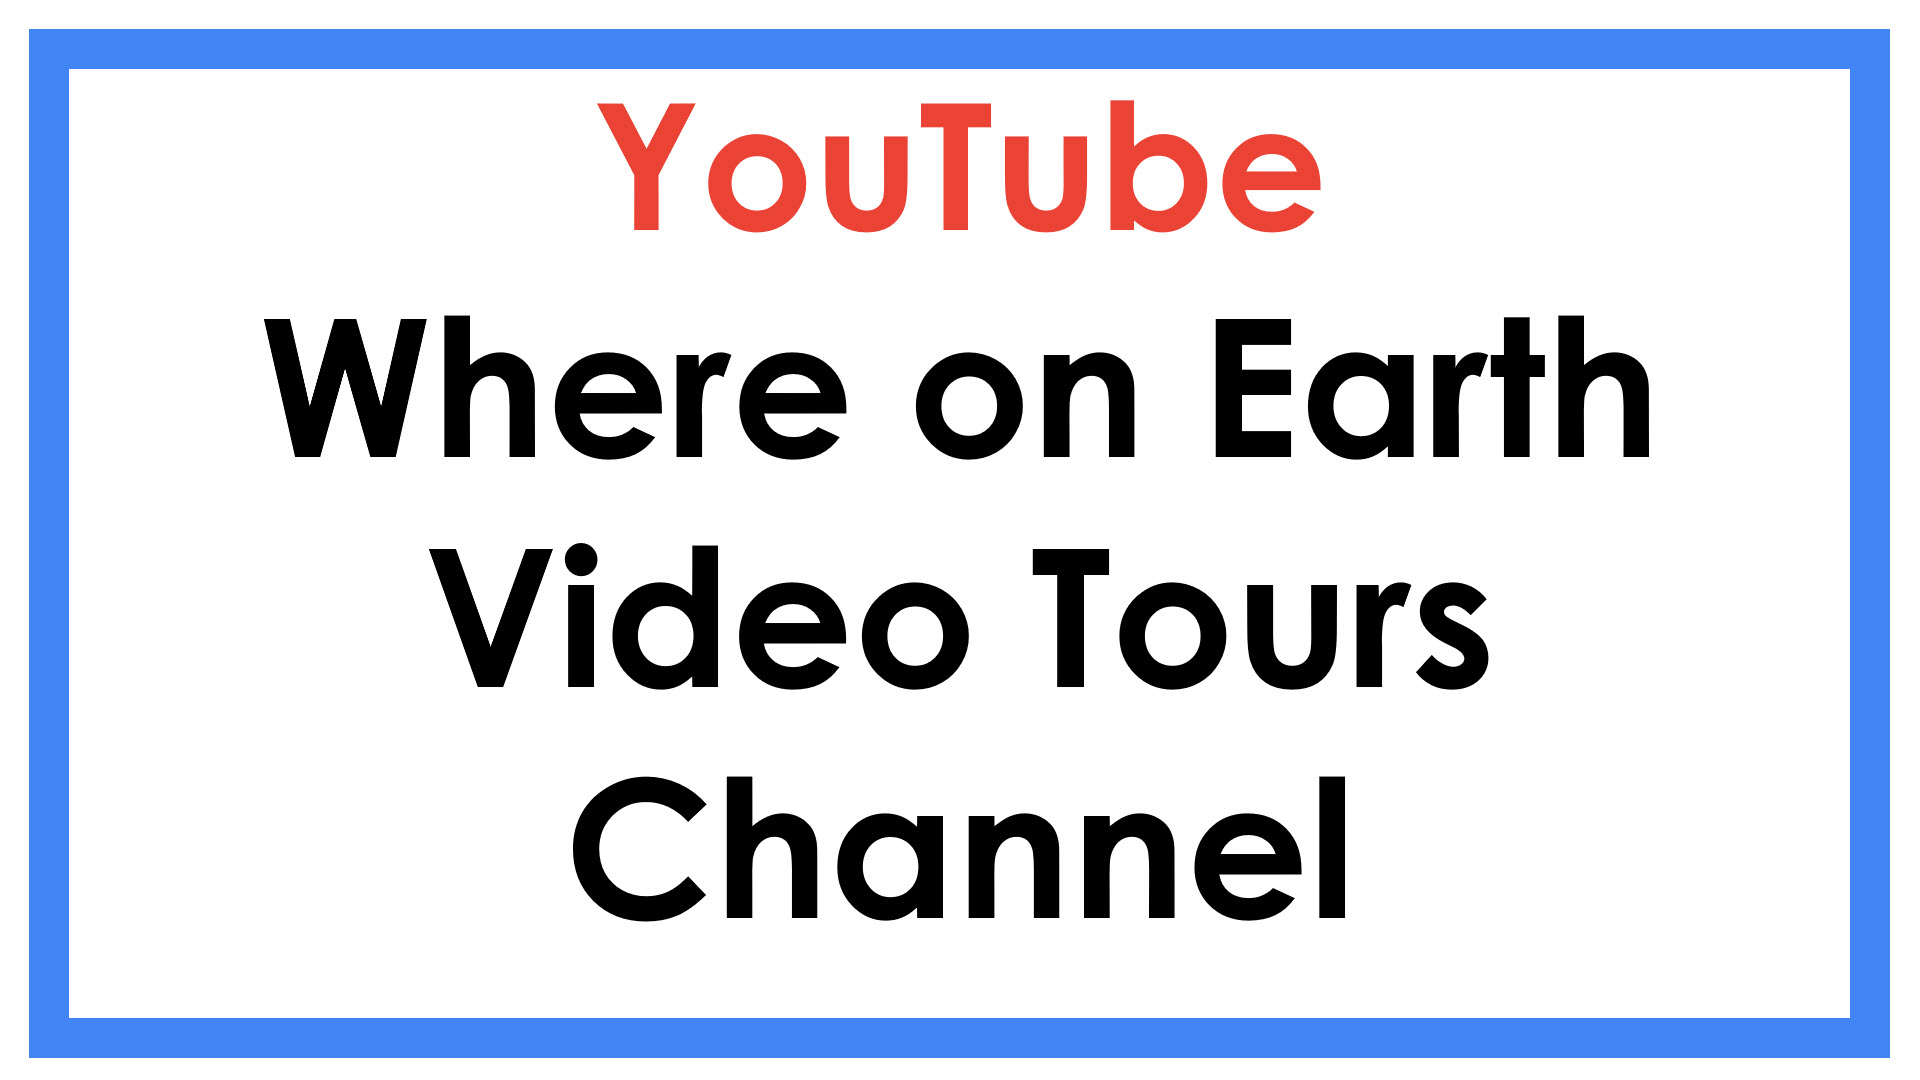 Where on Earth Video Tours Channel